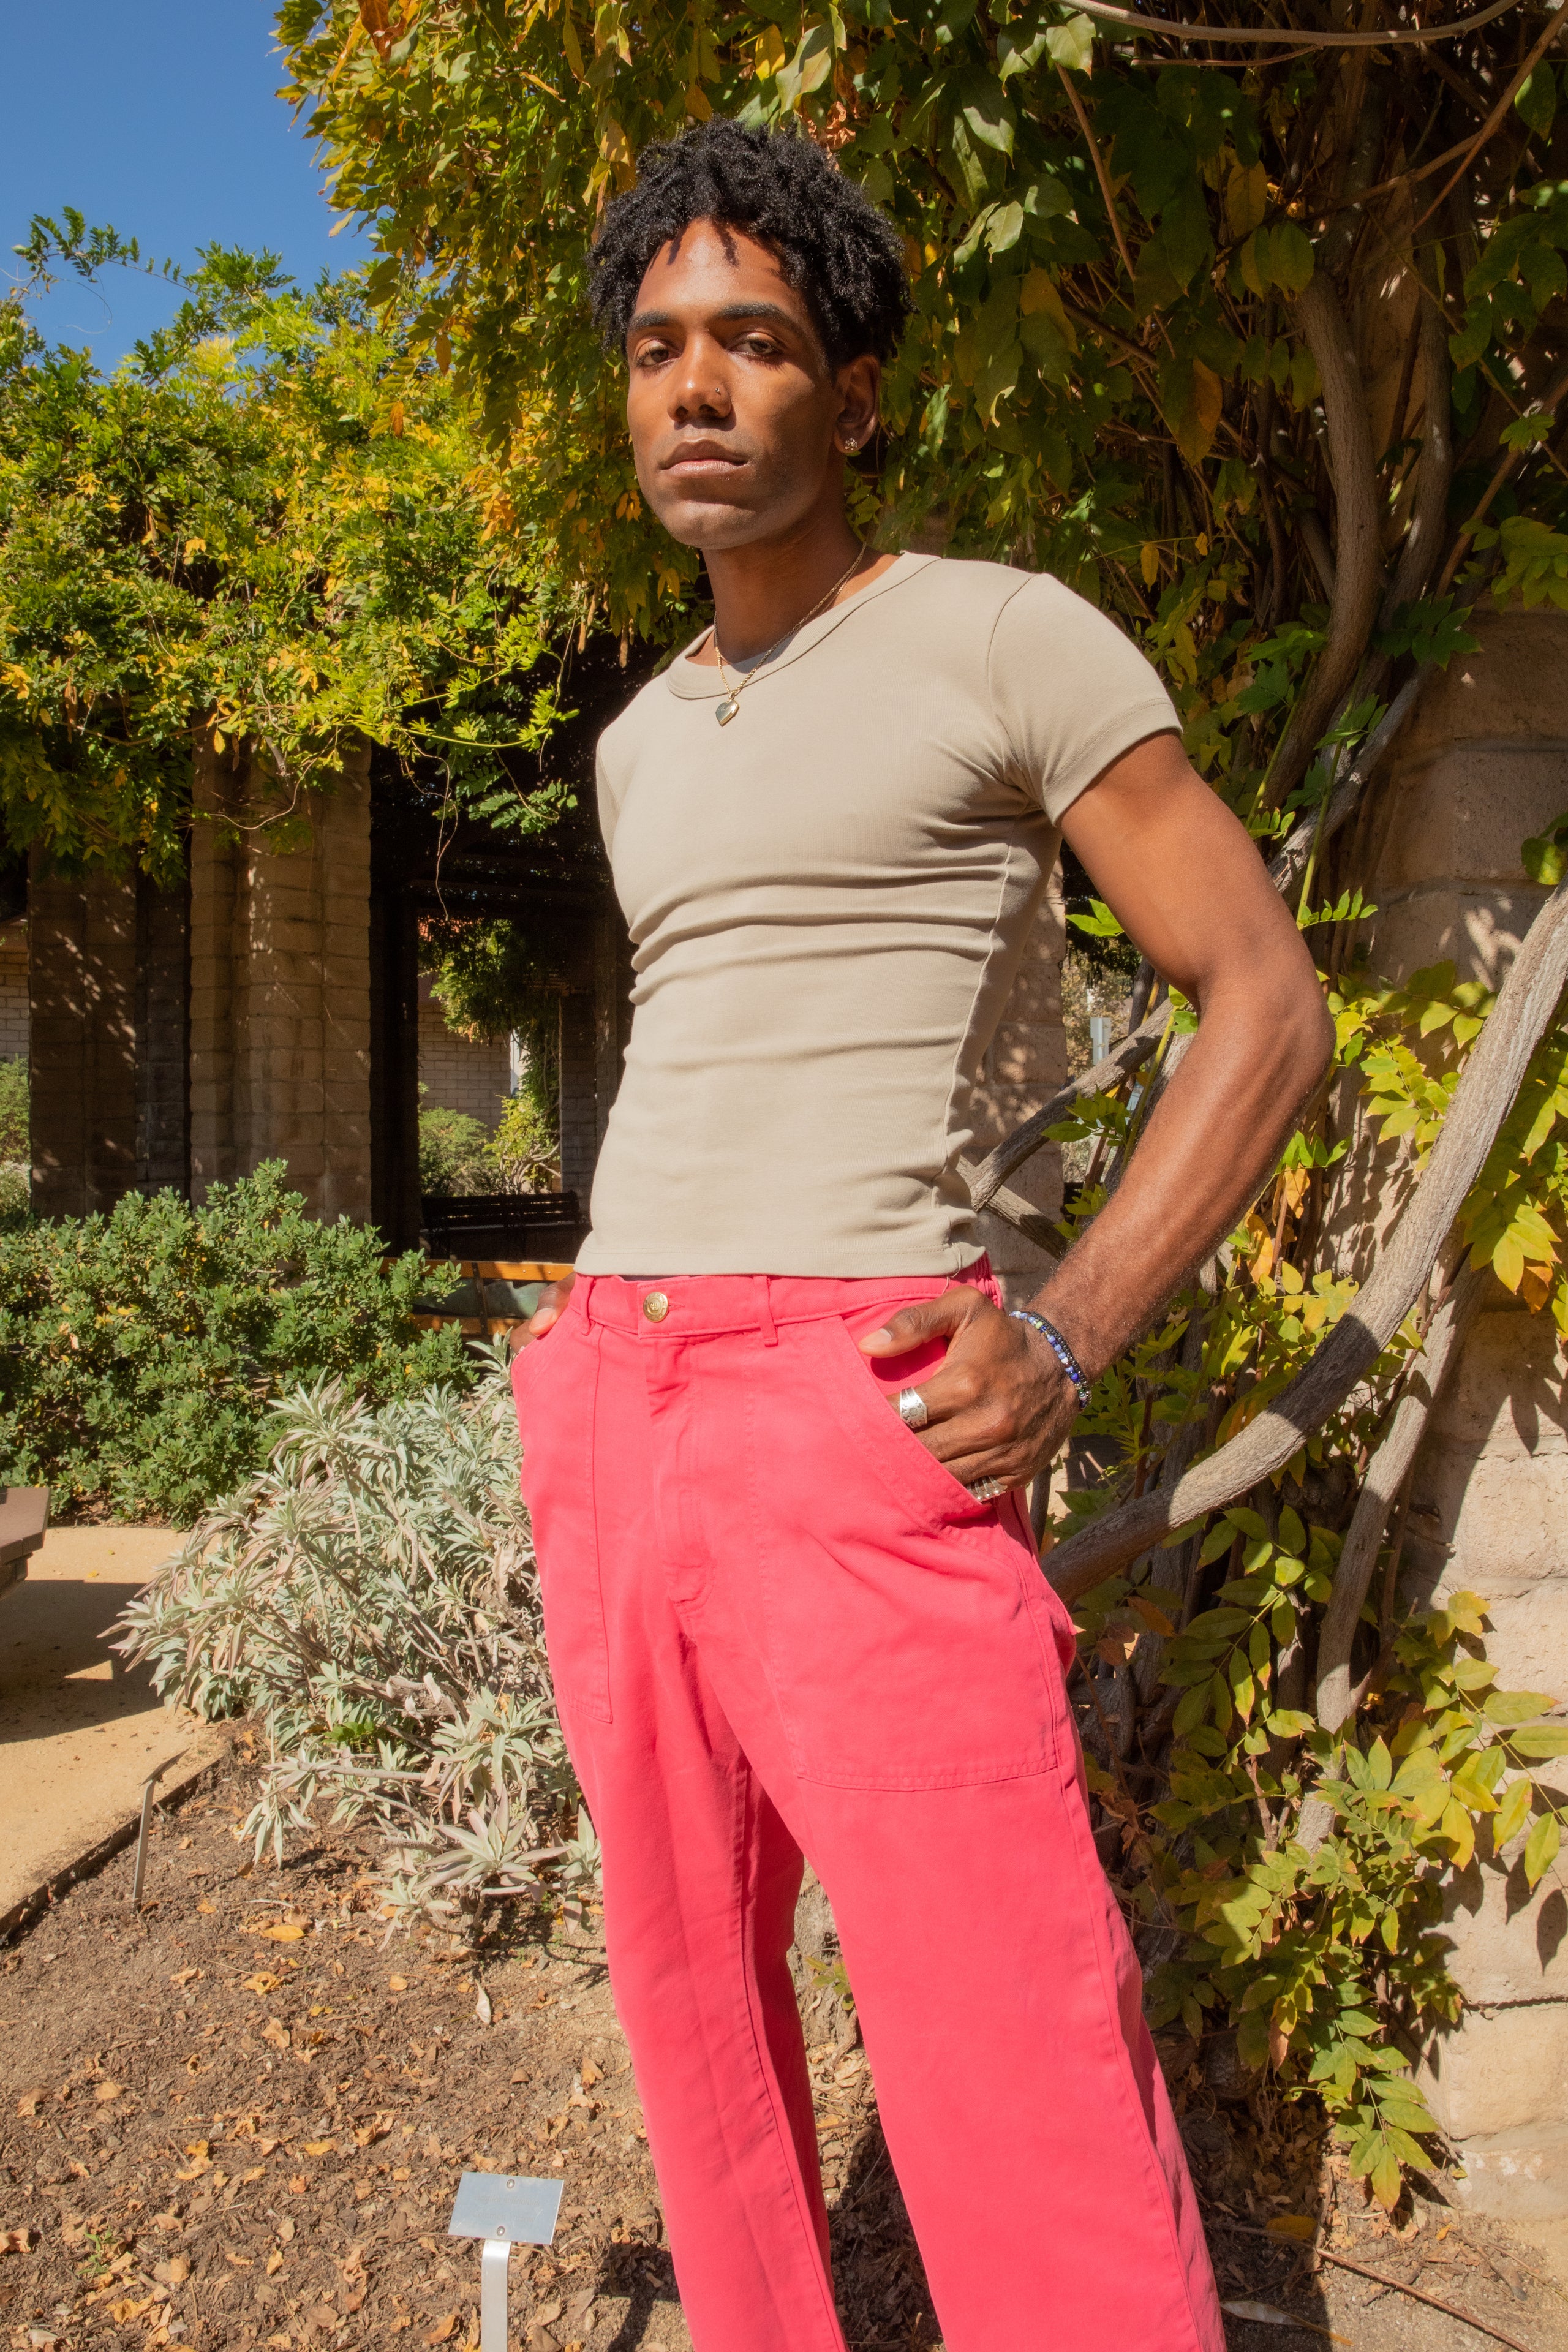 Jerrod wearing Work Pants in Hot Pink and Baby Tee in Khaki Grey